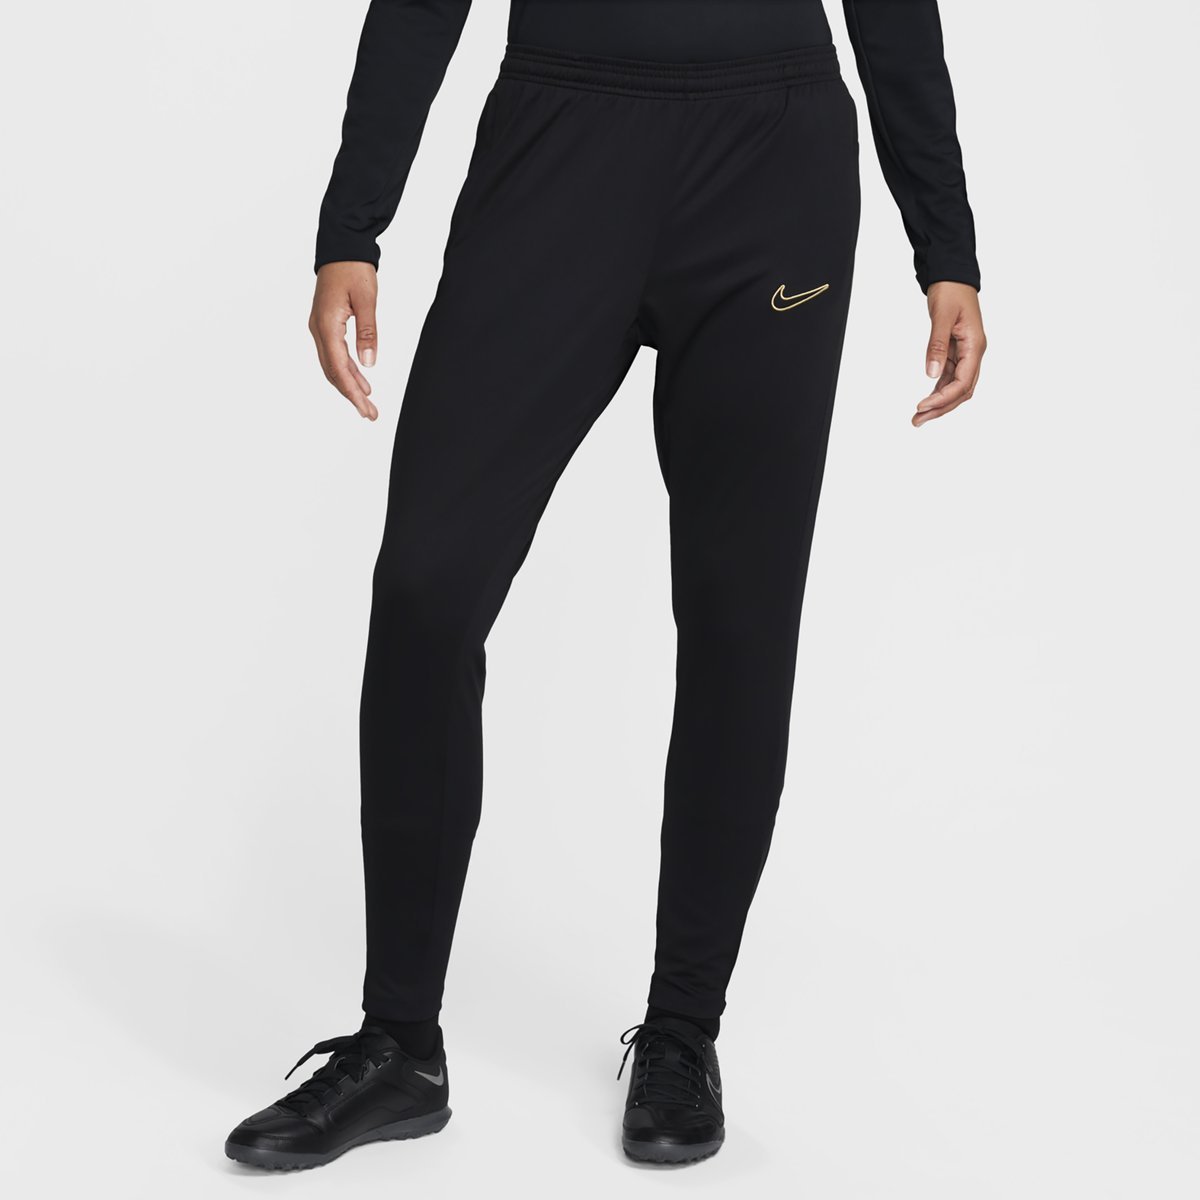 Buy Nike Black Dri-FIT Tapered Training Joggers from the Next UK